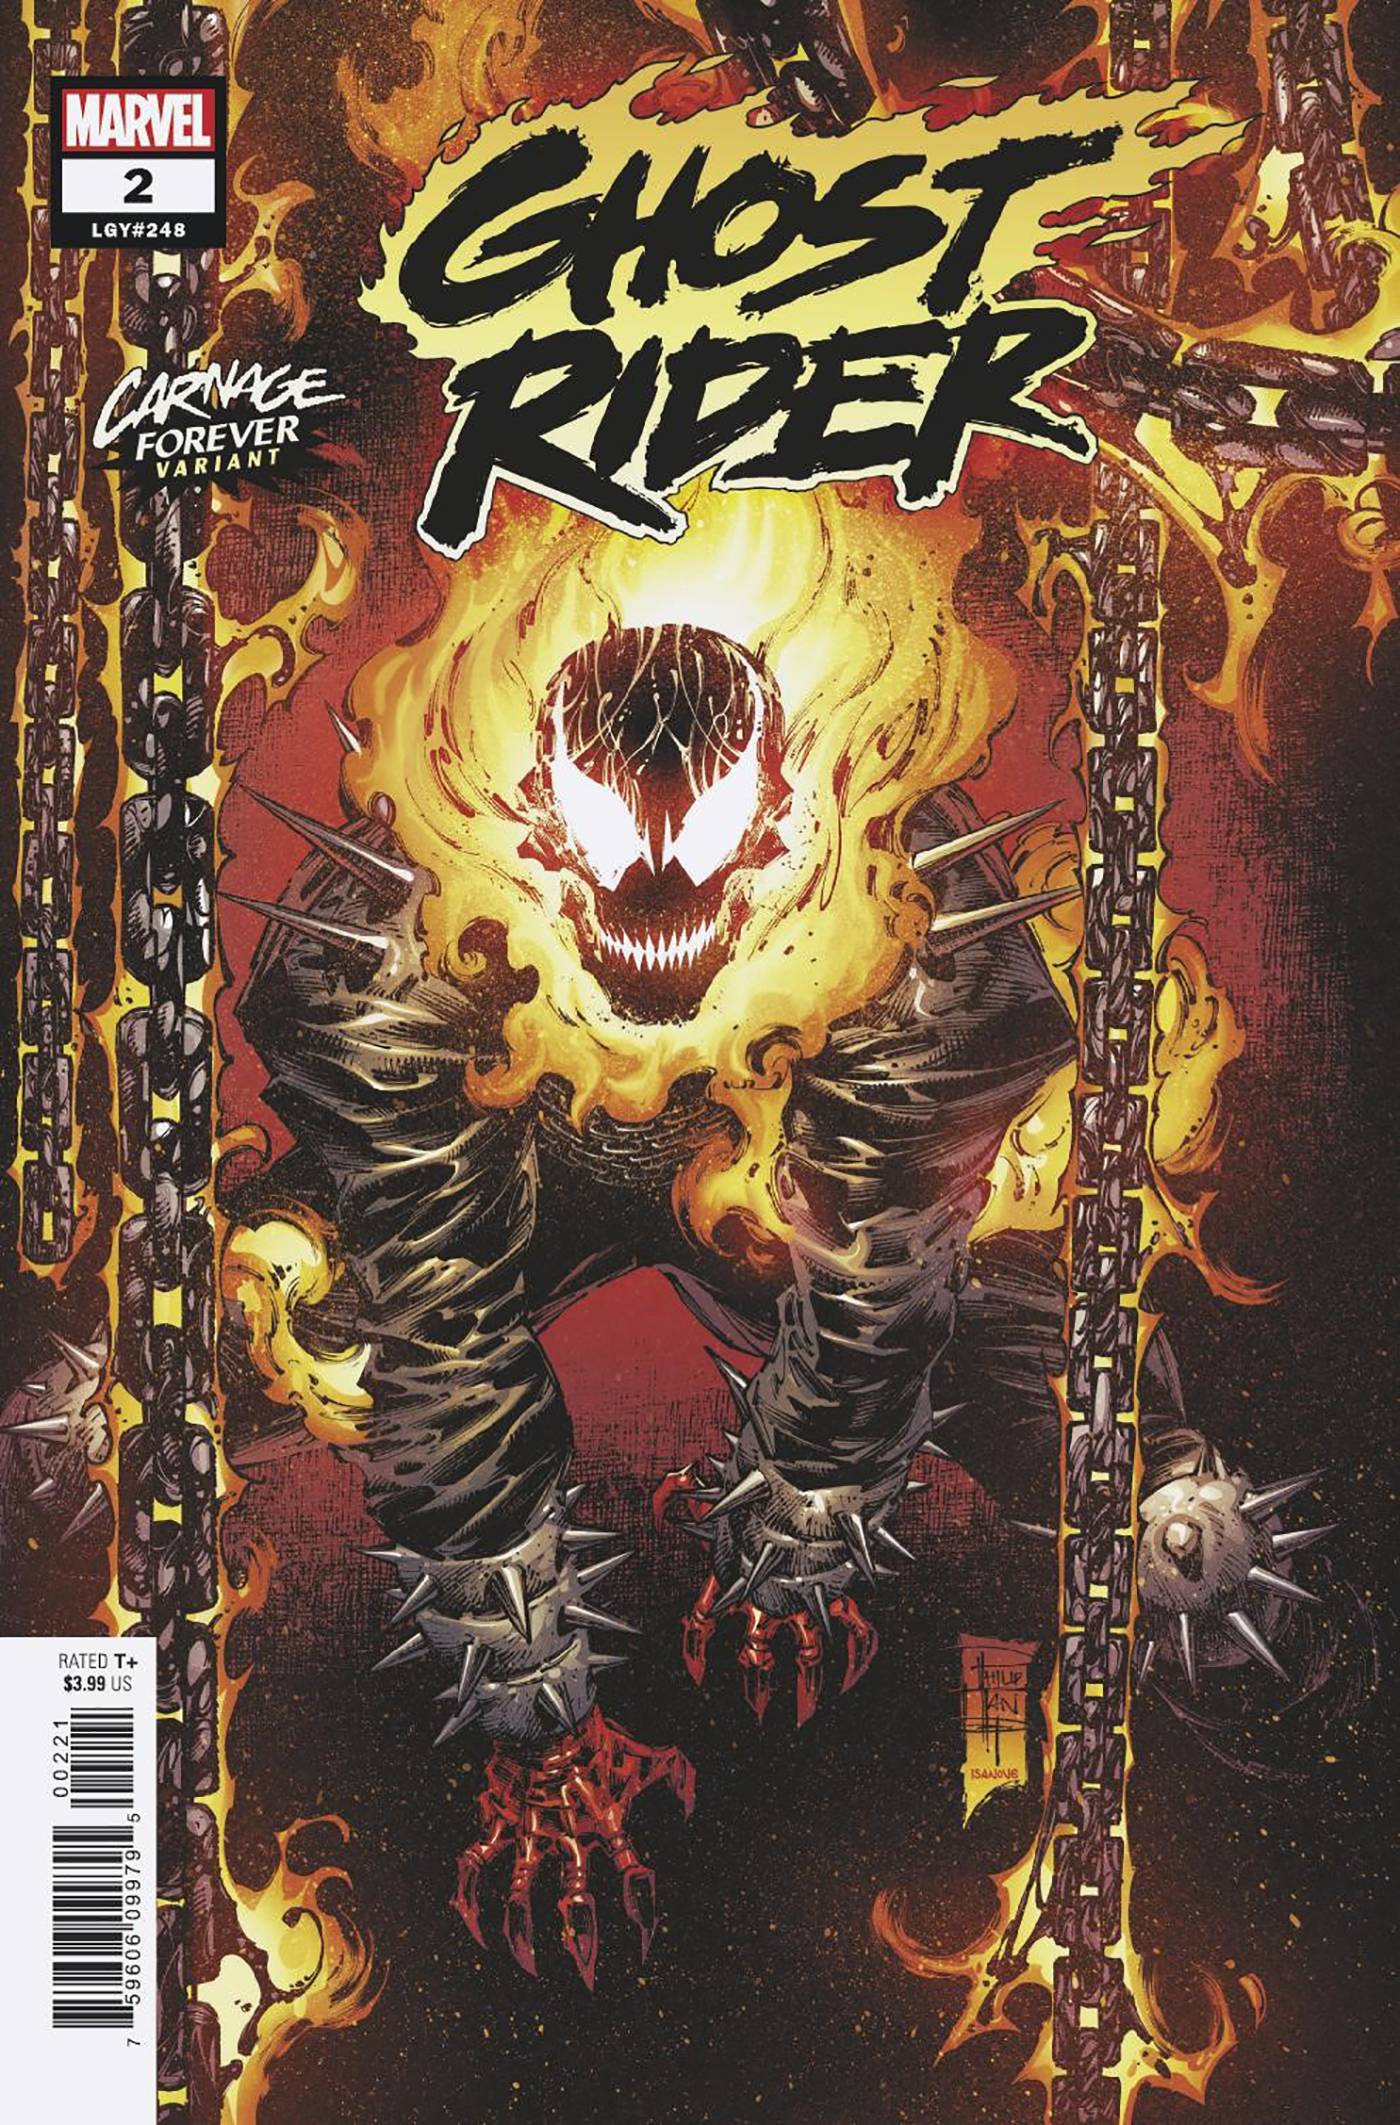 Carnage ghost rider